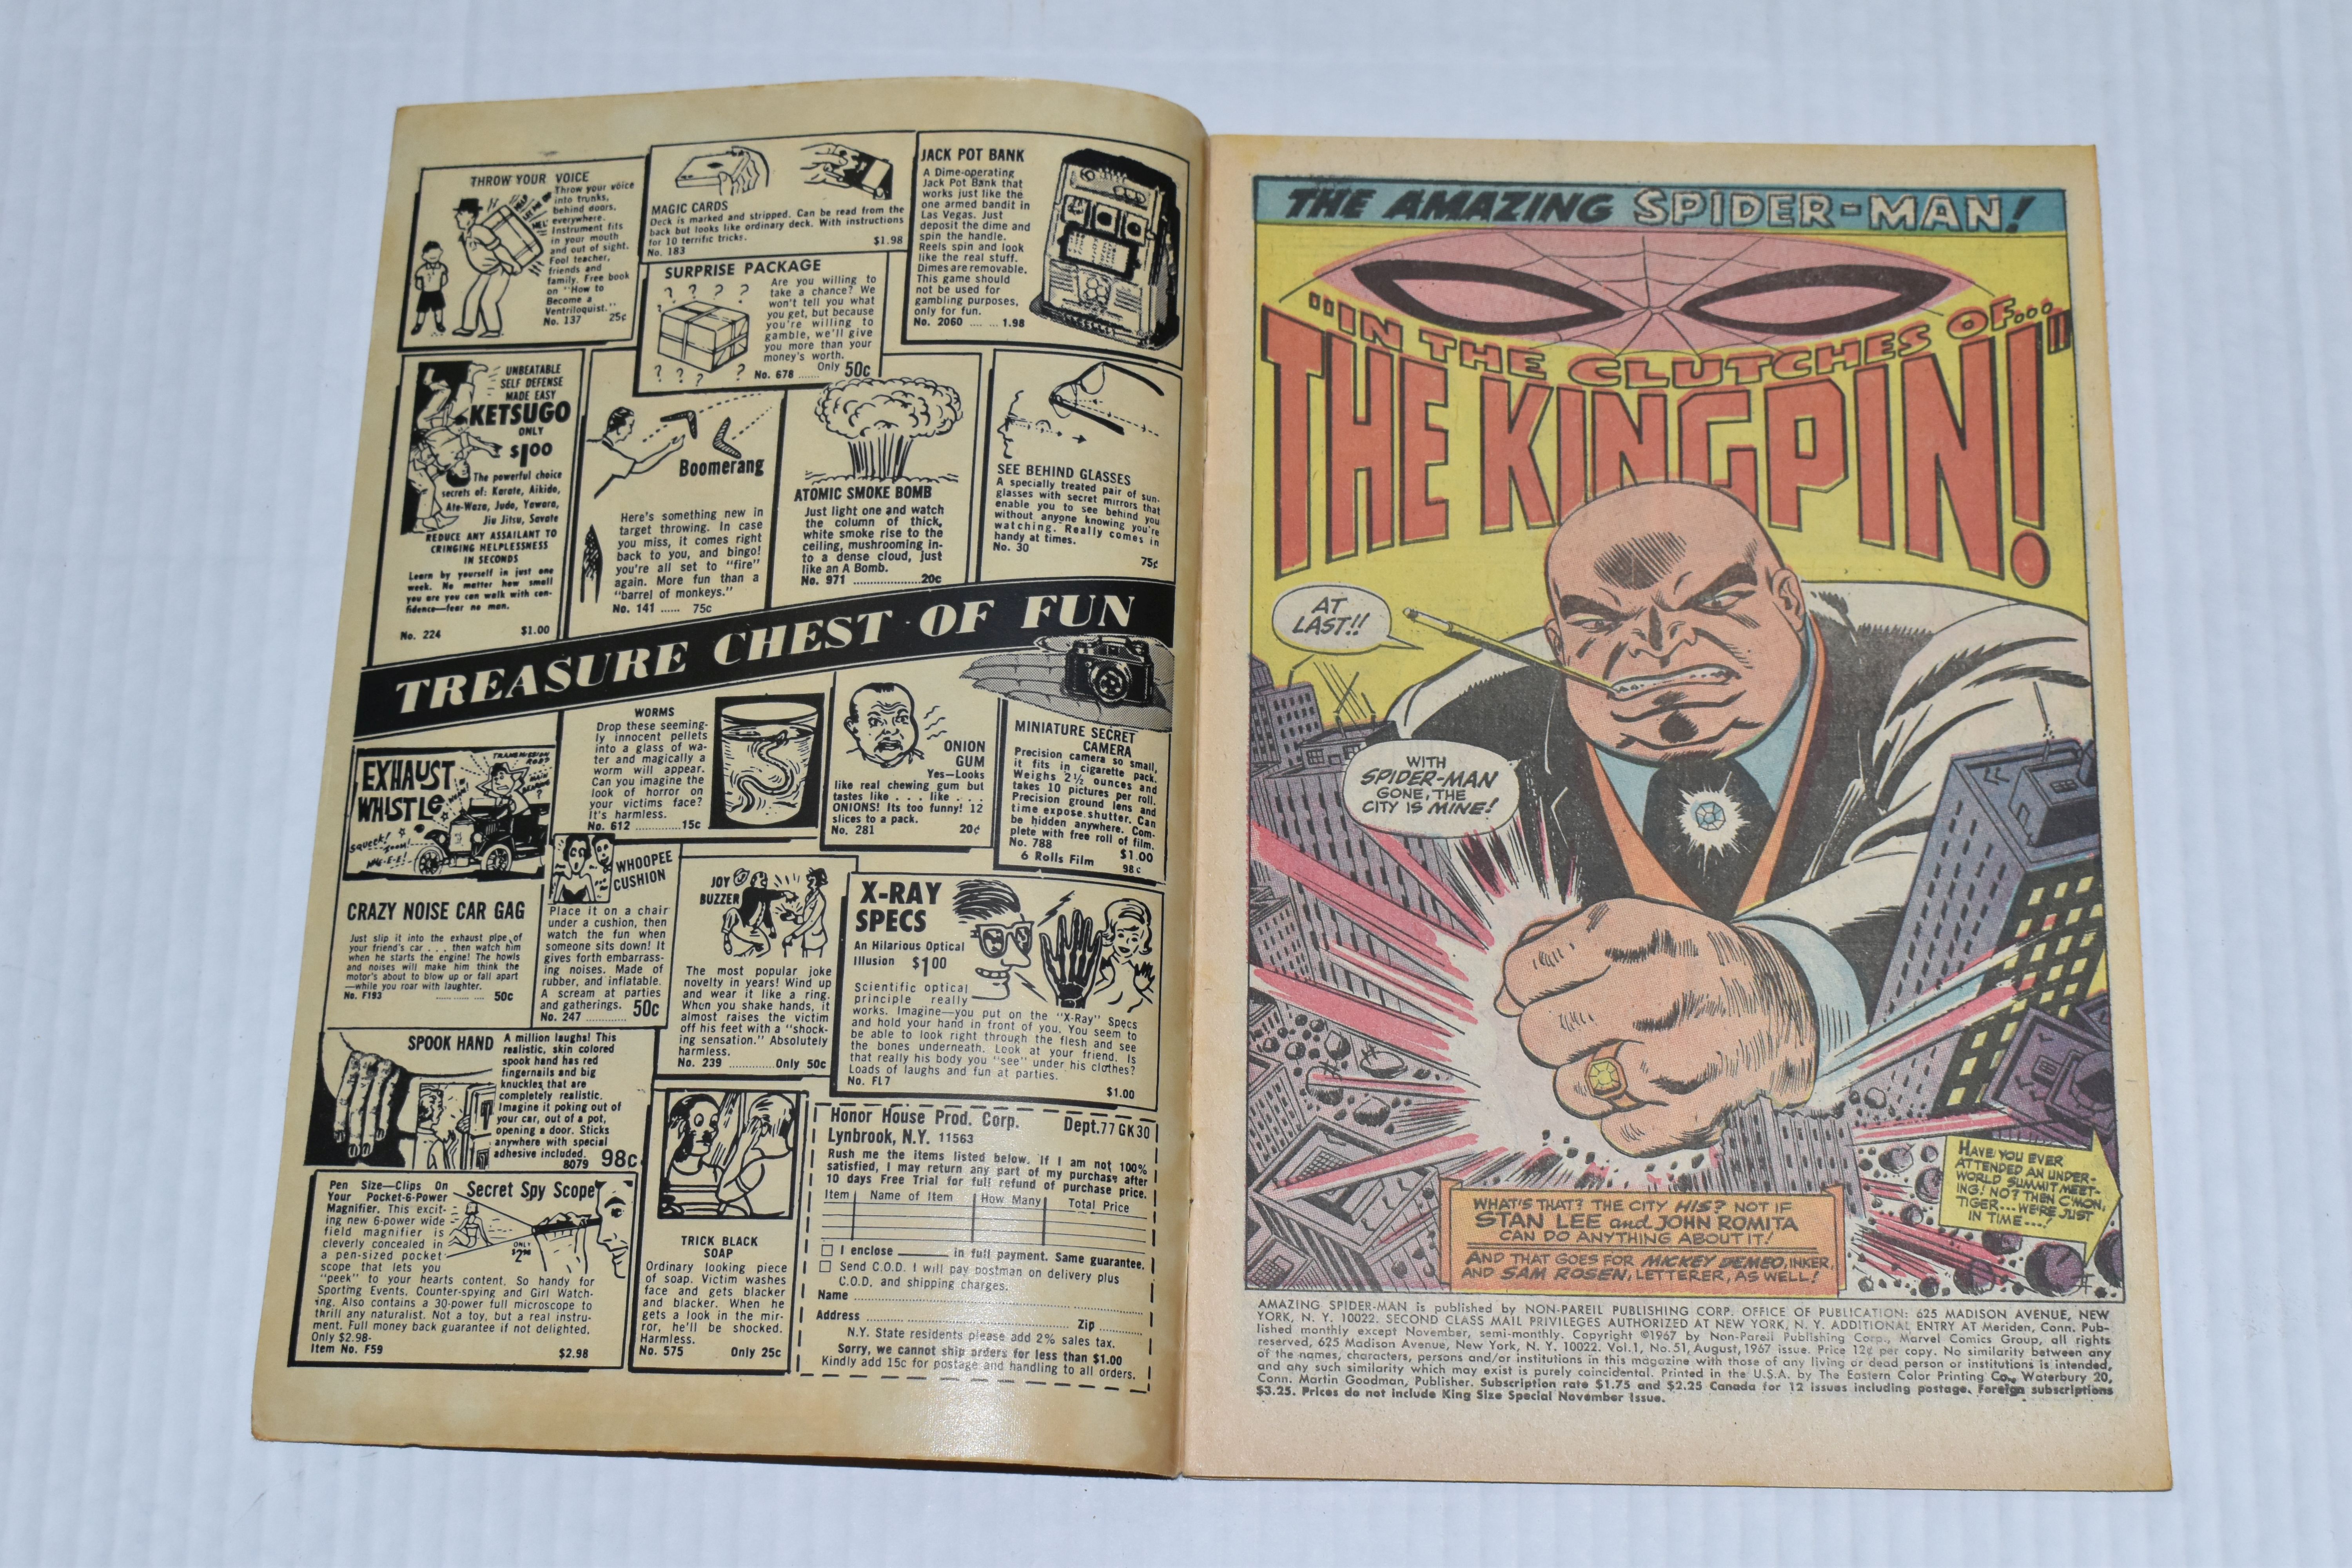 AMAING SPIDER-MAN NO. 51 MARVEL COMIC, second appearance of Kingpin, comic shows signs of wear, - Image 2 of 4